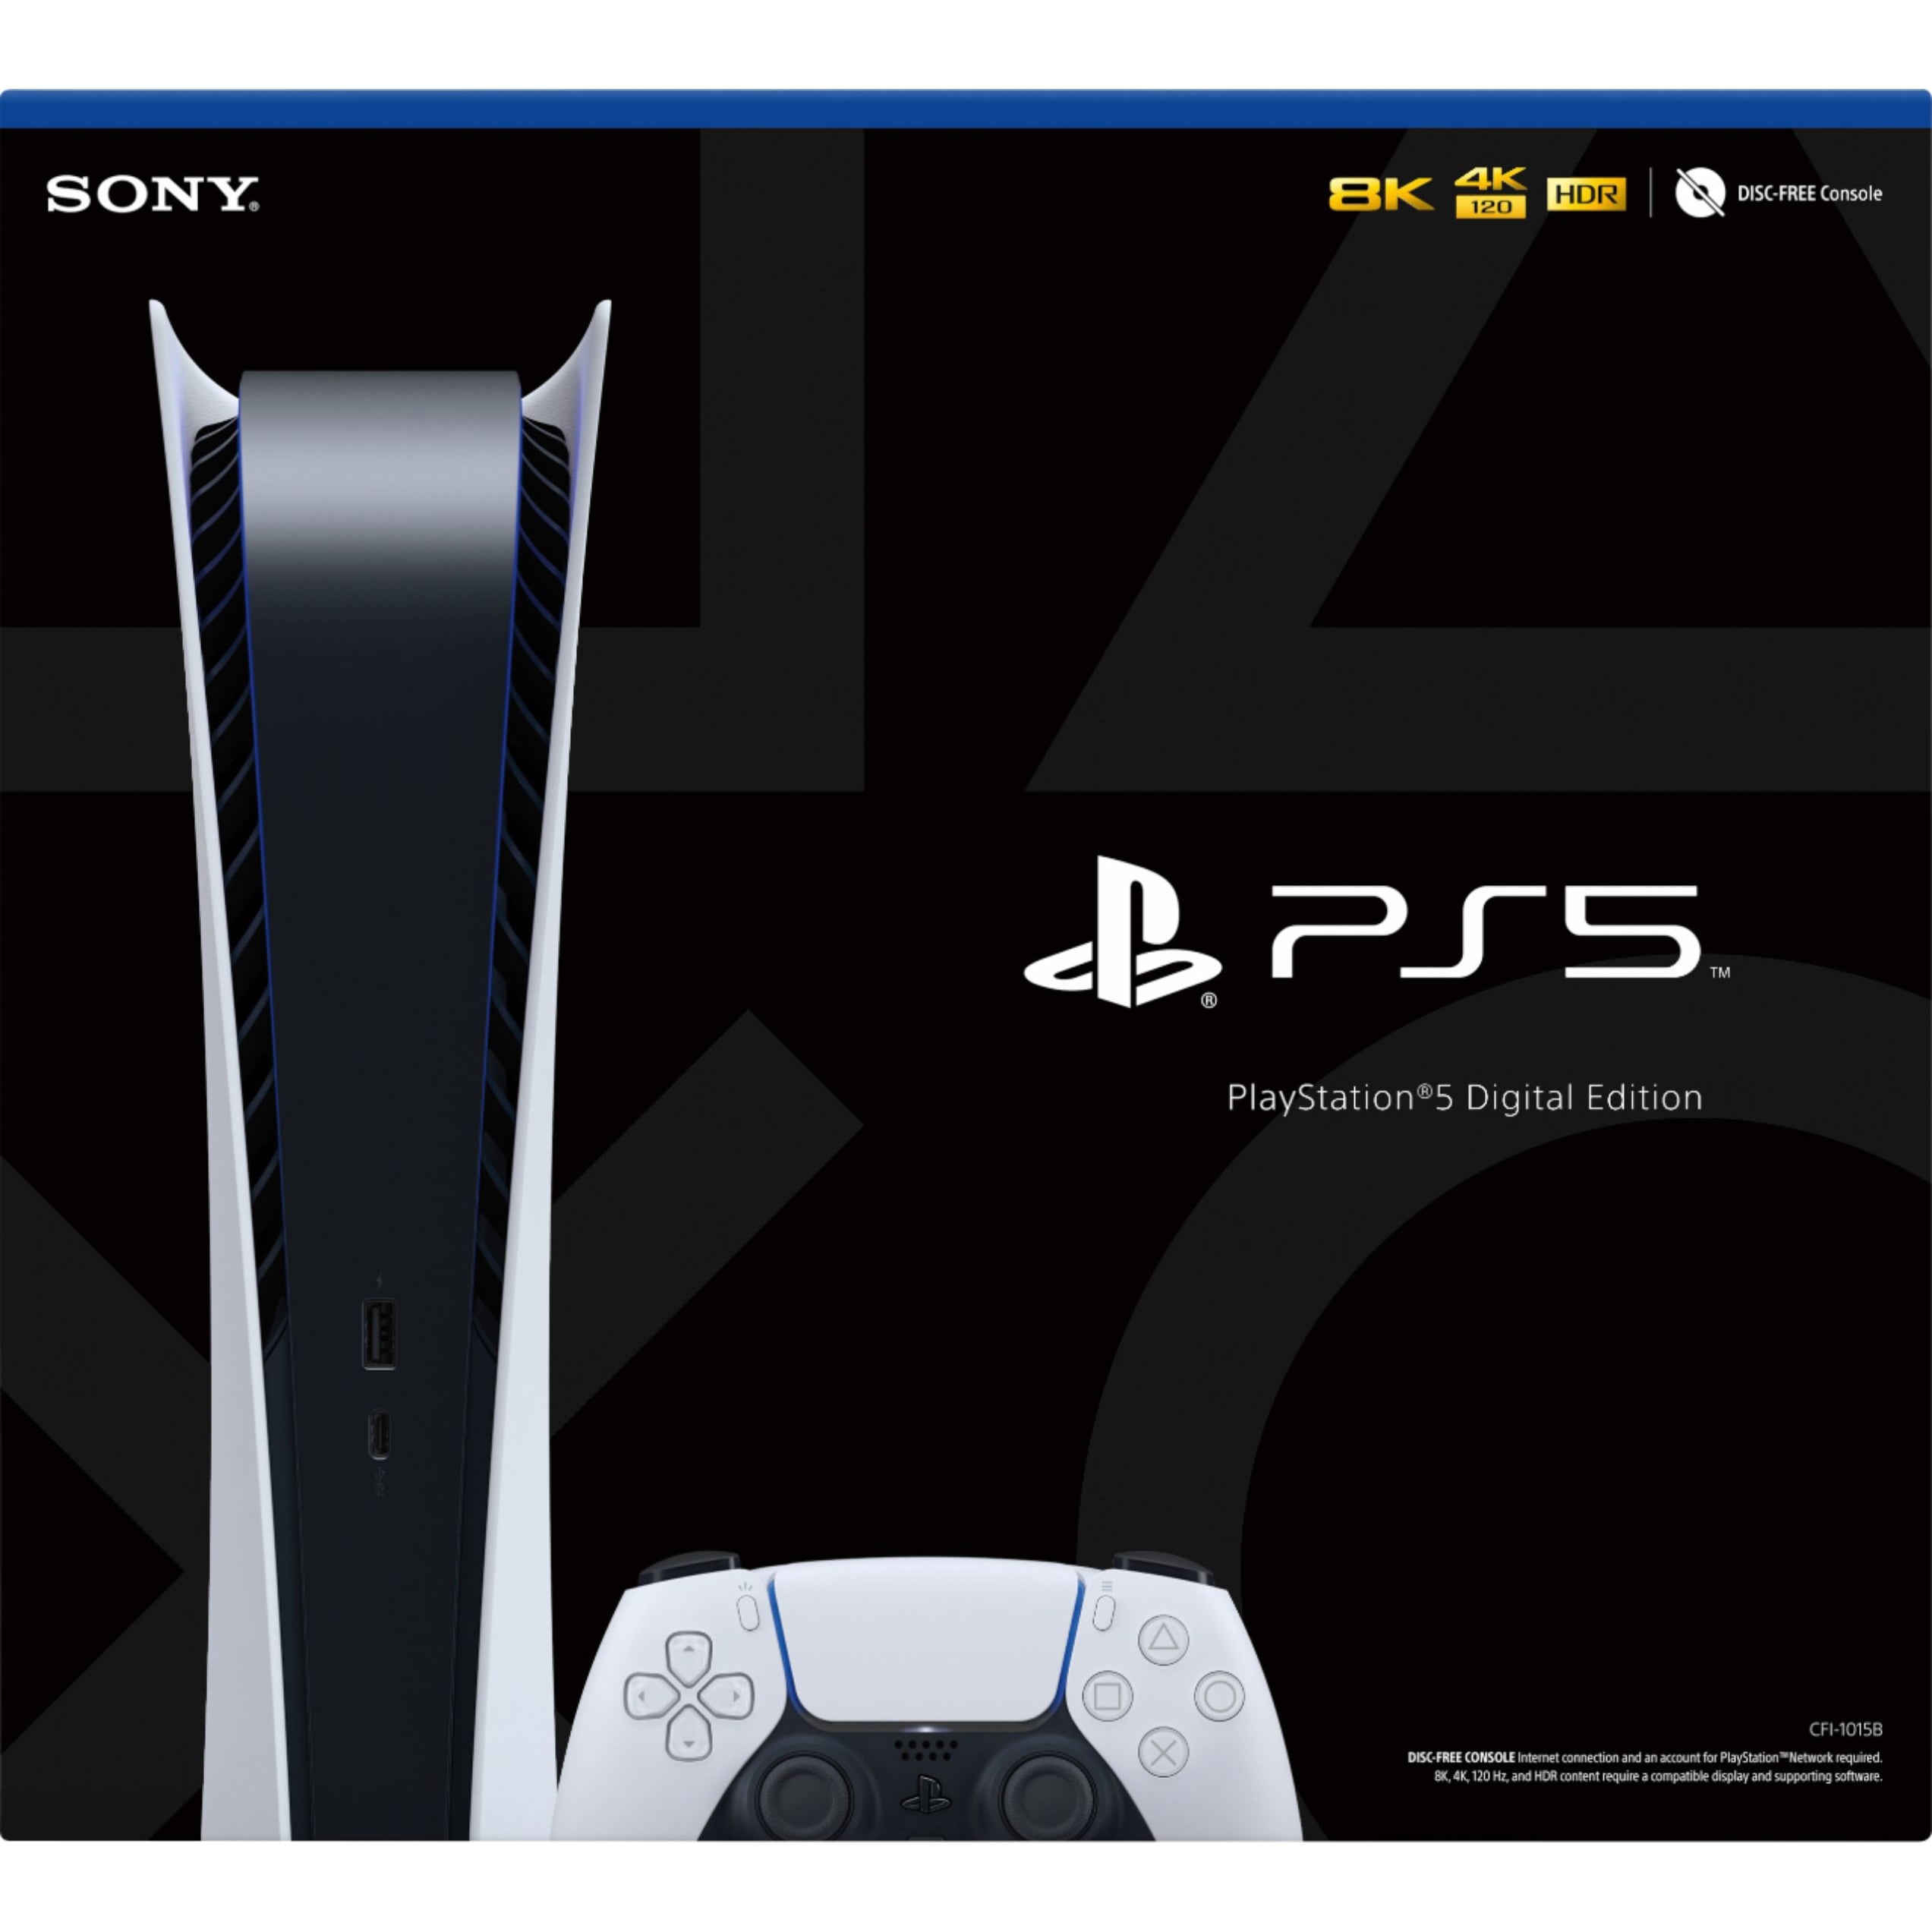 PS5 Sony Playstation 5 NEW Digital Edition Gaming Console + 1 